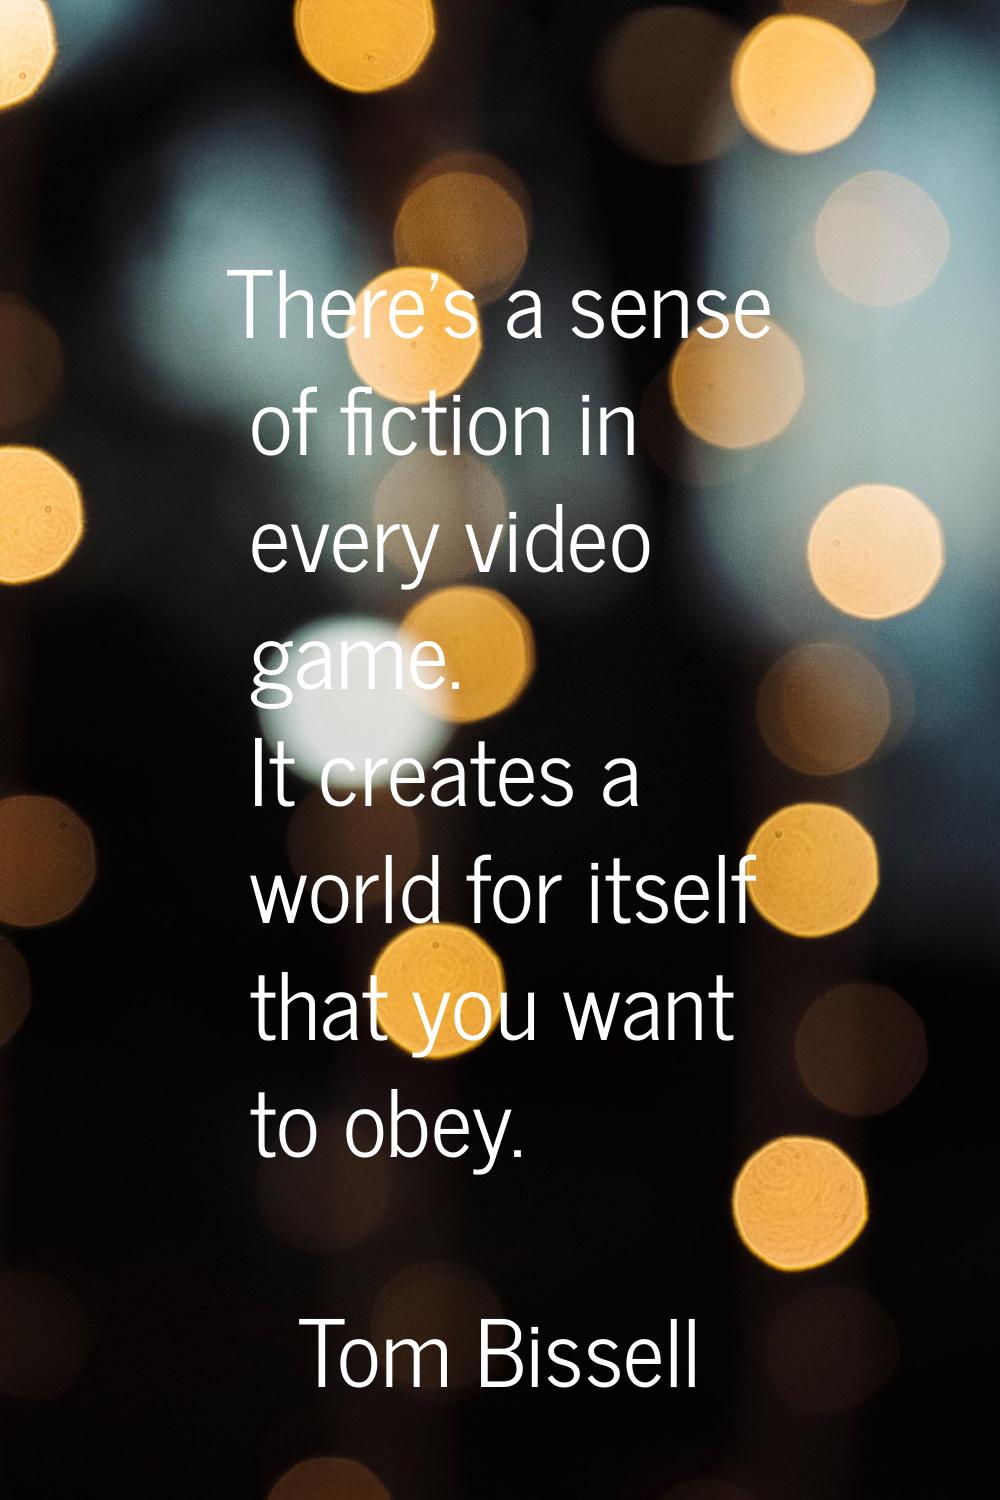 There's a sense of fiction in every video game. It creates a world for itself that you want to obey